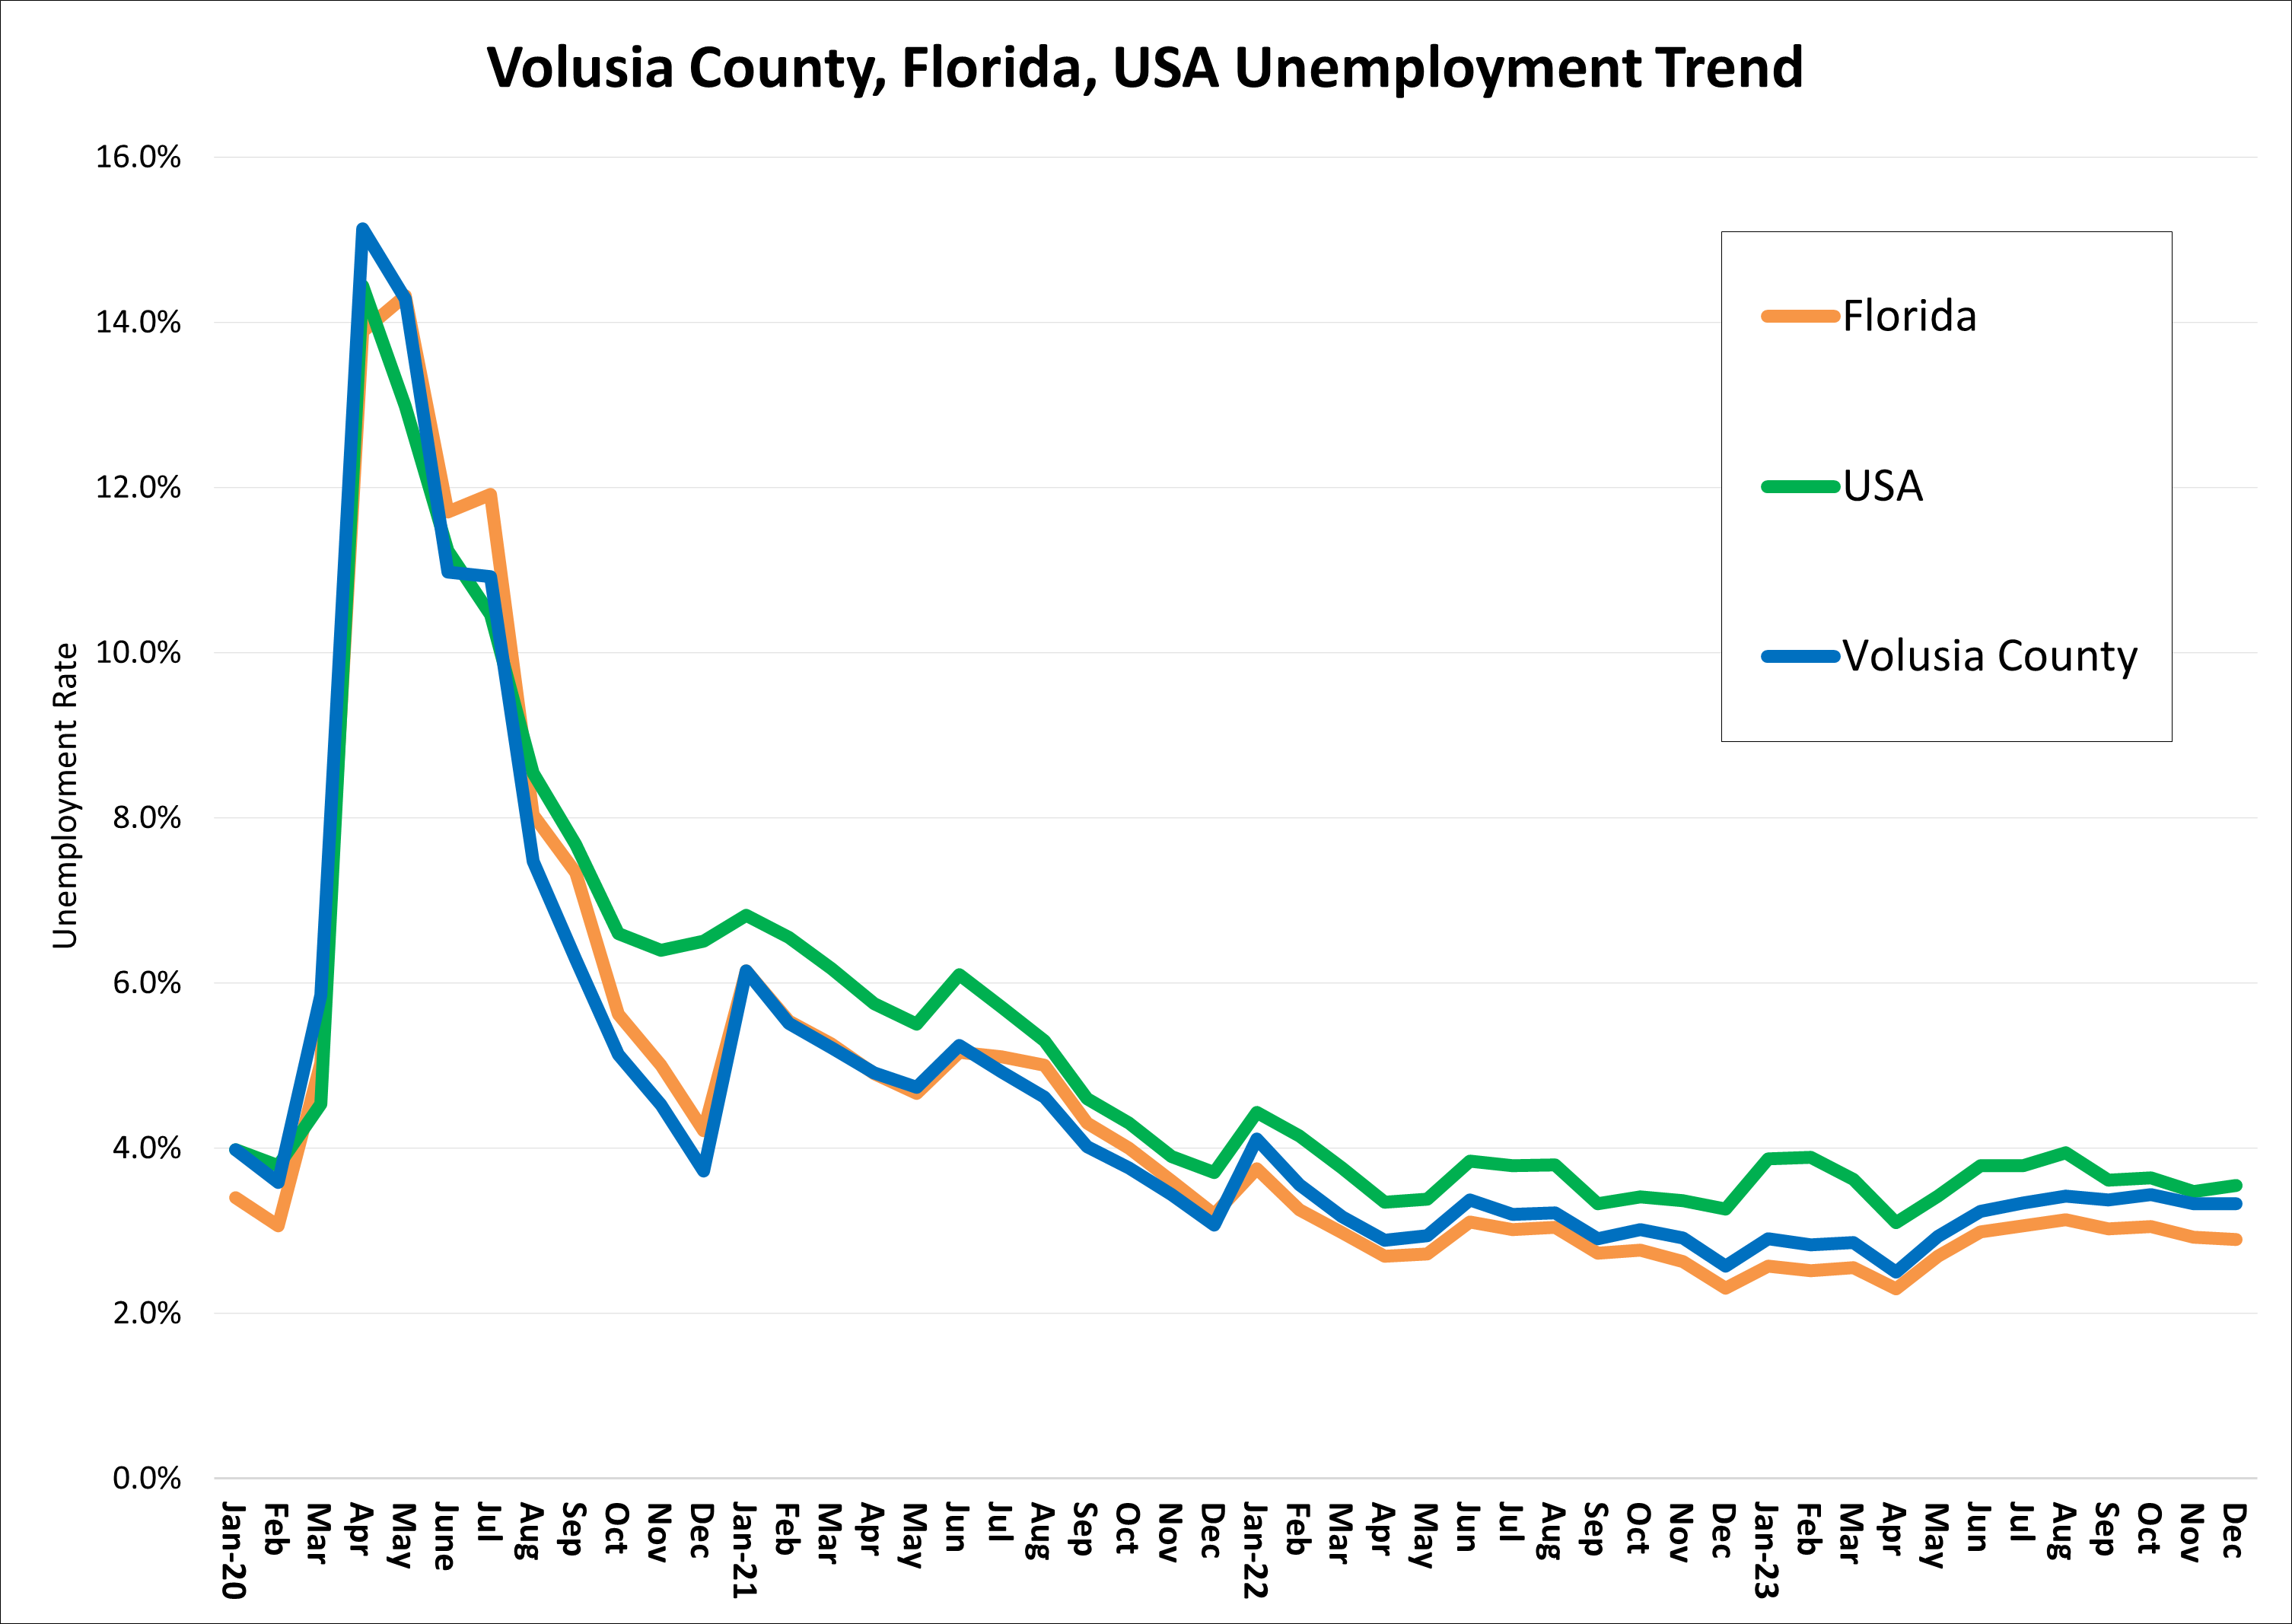 The chart shows the unemployment rate trend for Volusia County, Florida, and the US. After the impact of COVID and a rate of 15.1%, Volusia County's unemployment rate has steadily decreased and is currently at 3.4% as of Aug 2023. Florida's unemployment rate is 3.1% and the US is 3.9%.